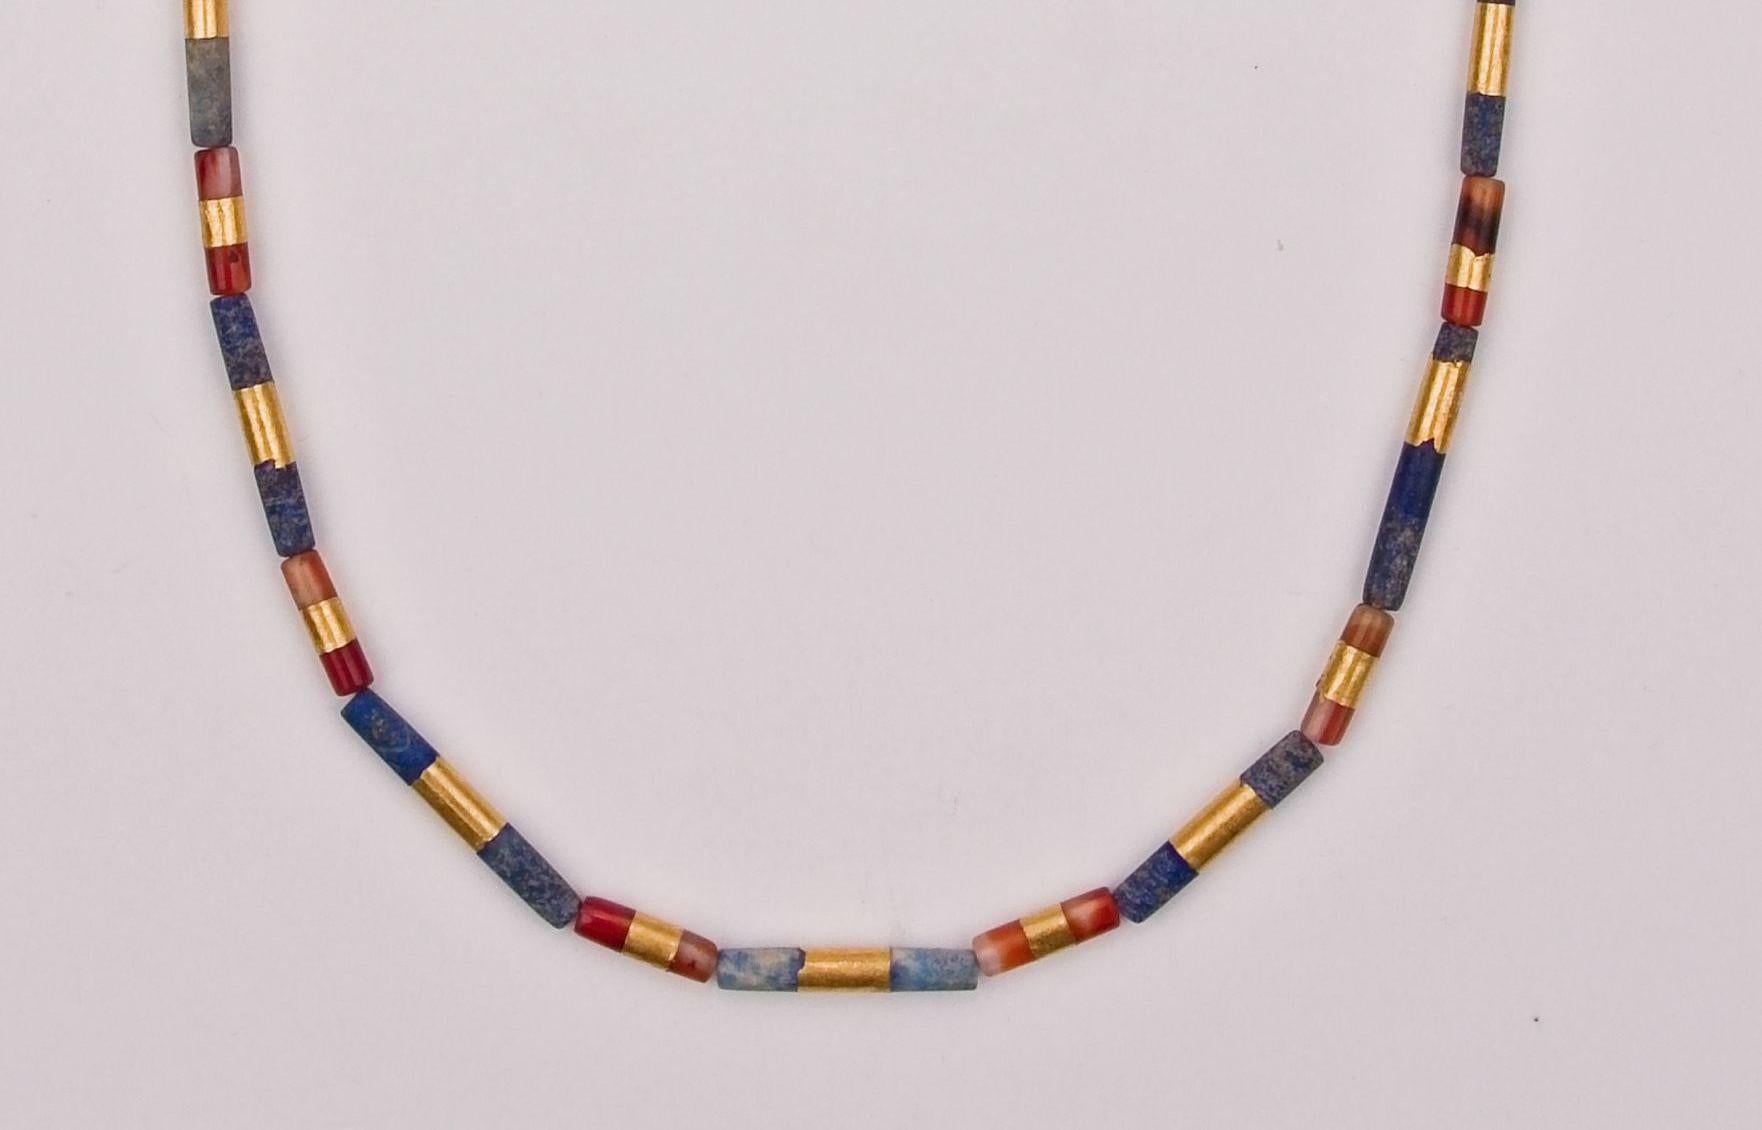 Fifteen long cylindrical lapis lazuli beads and fourteen somewhat shorter carnelian cylindrical beads alternating, all of which have a band of 22k gold encircling the bead at the center. The thin bands of gold cover about a third of the length at